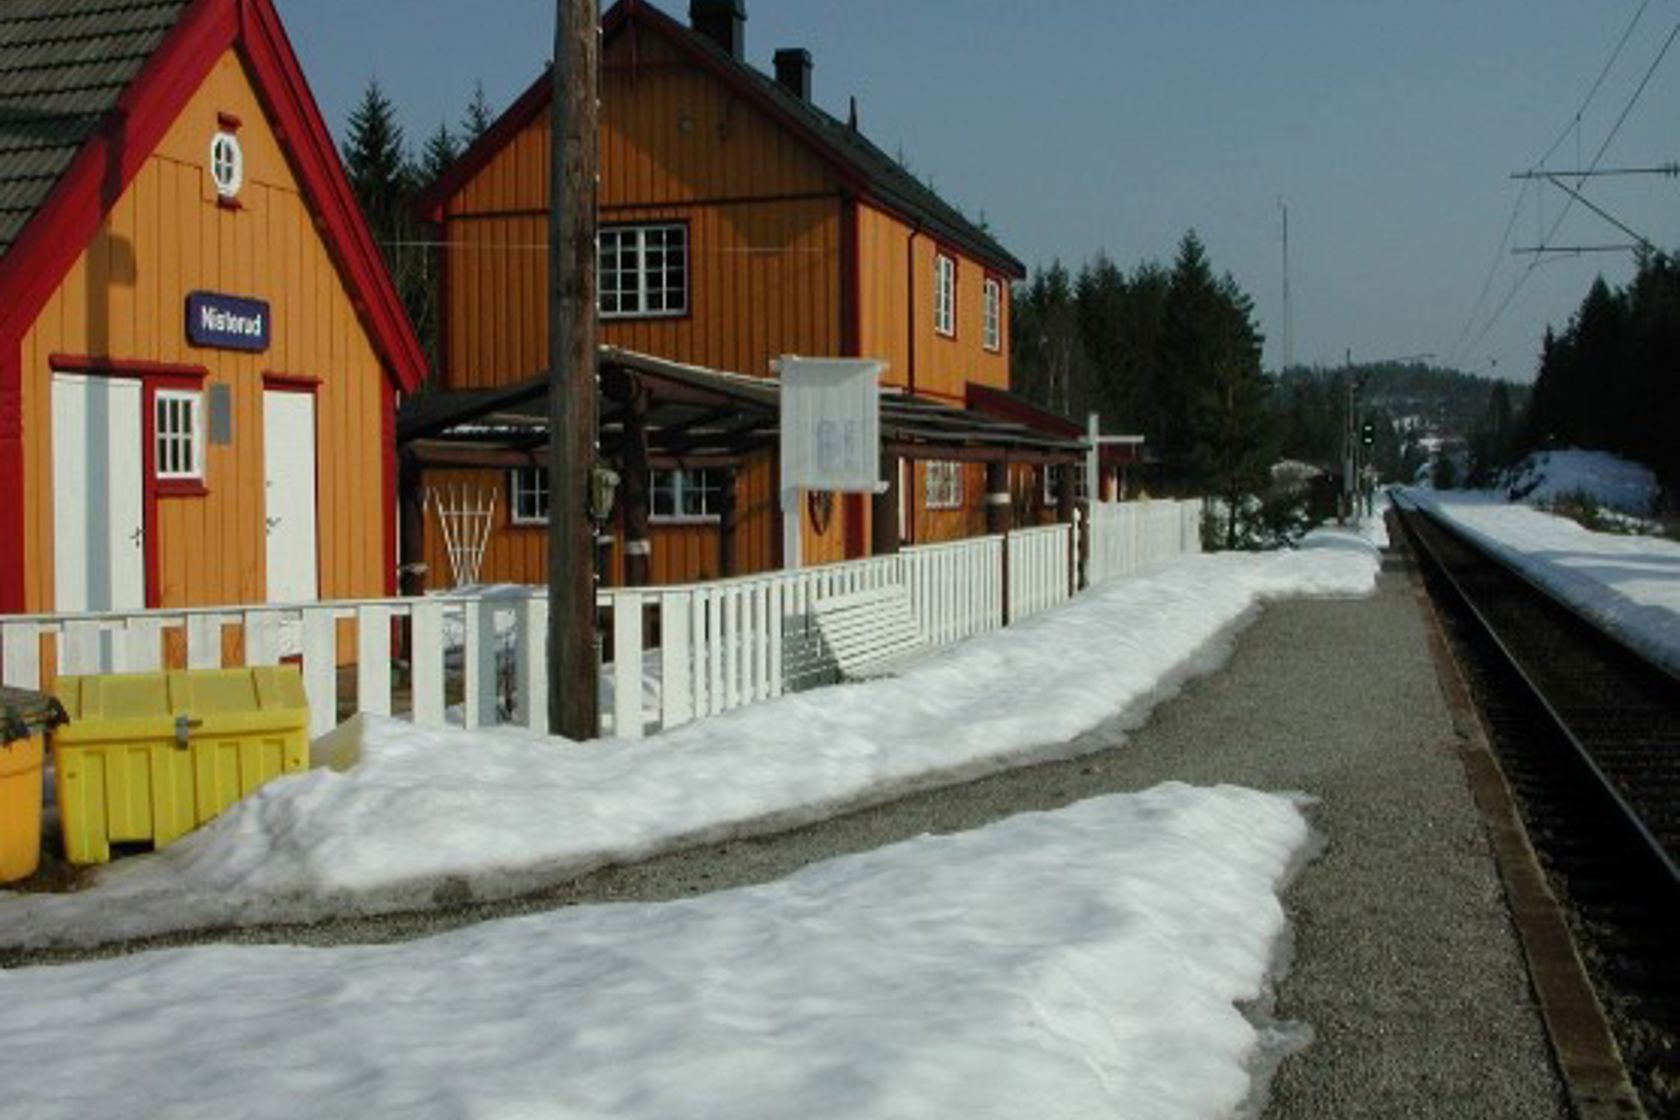 Exterior view of Nisterud station